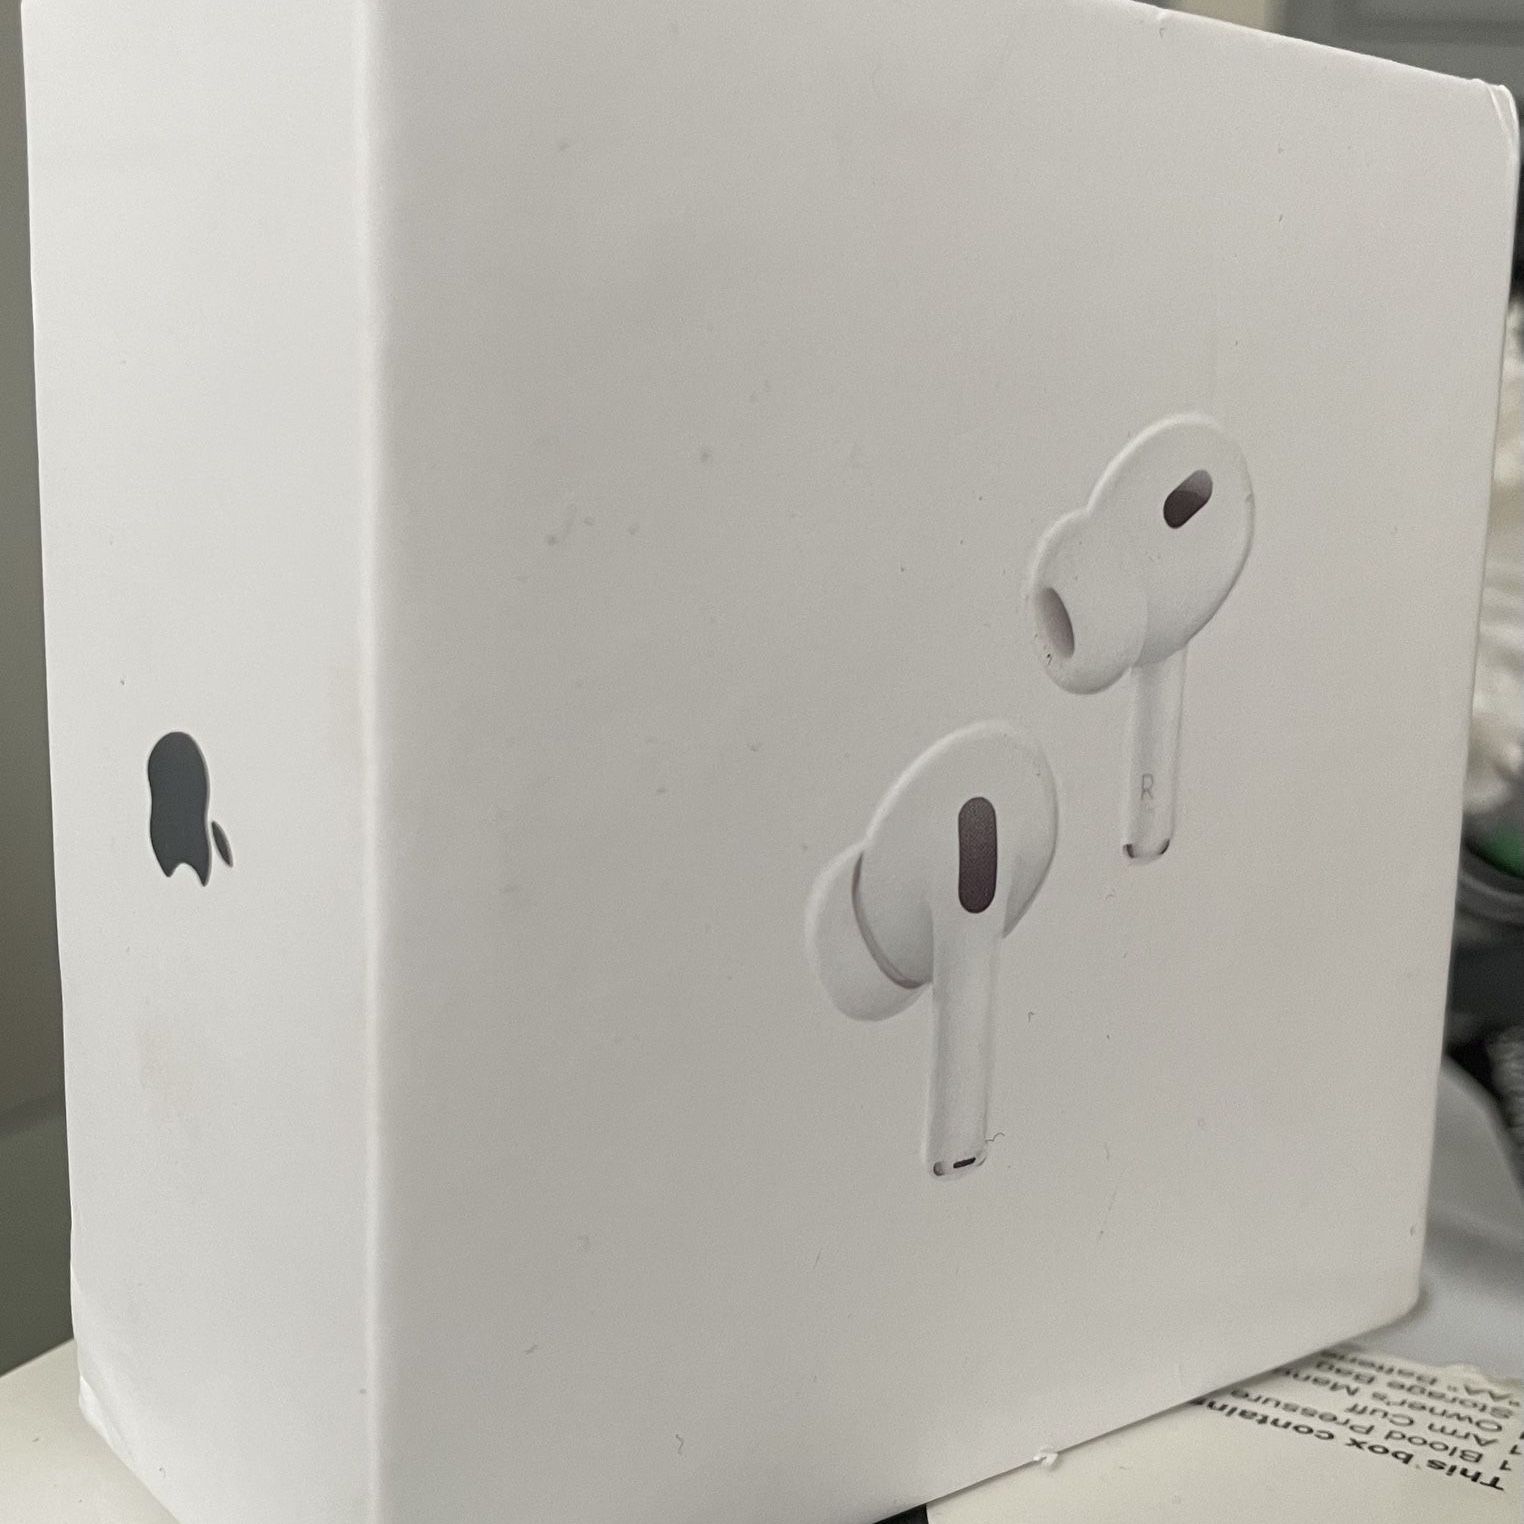 APPLE AIRPOD PRO 2ND GENERATION (BRAND NEW)(PROMOTIONAL PRICE)